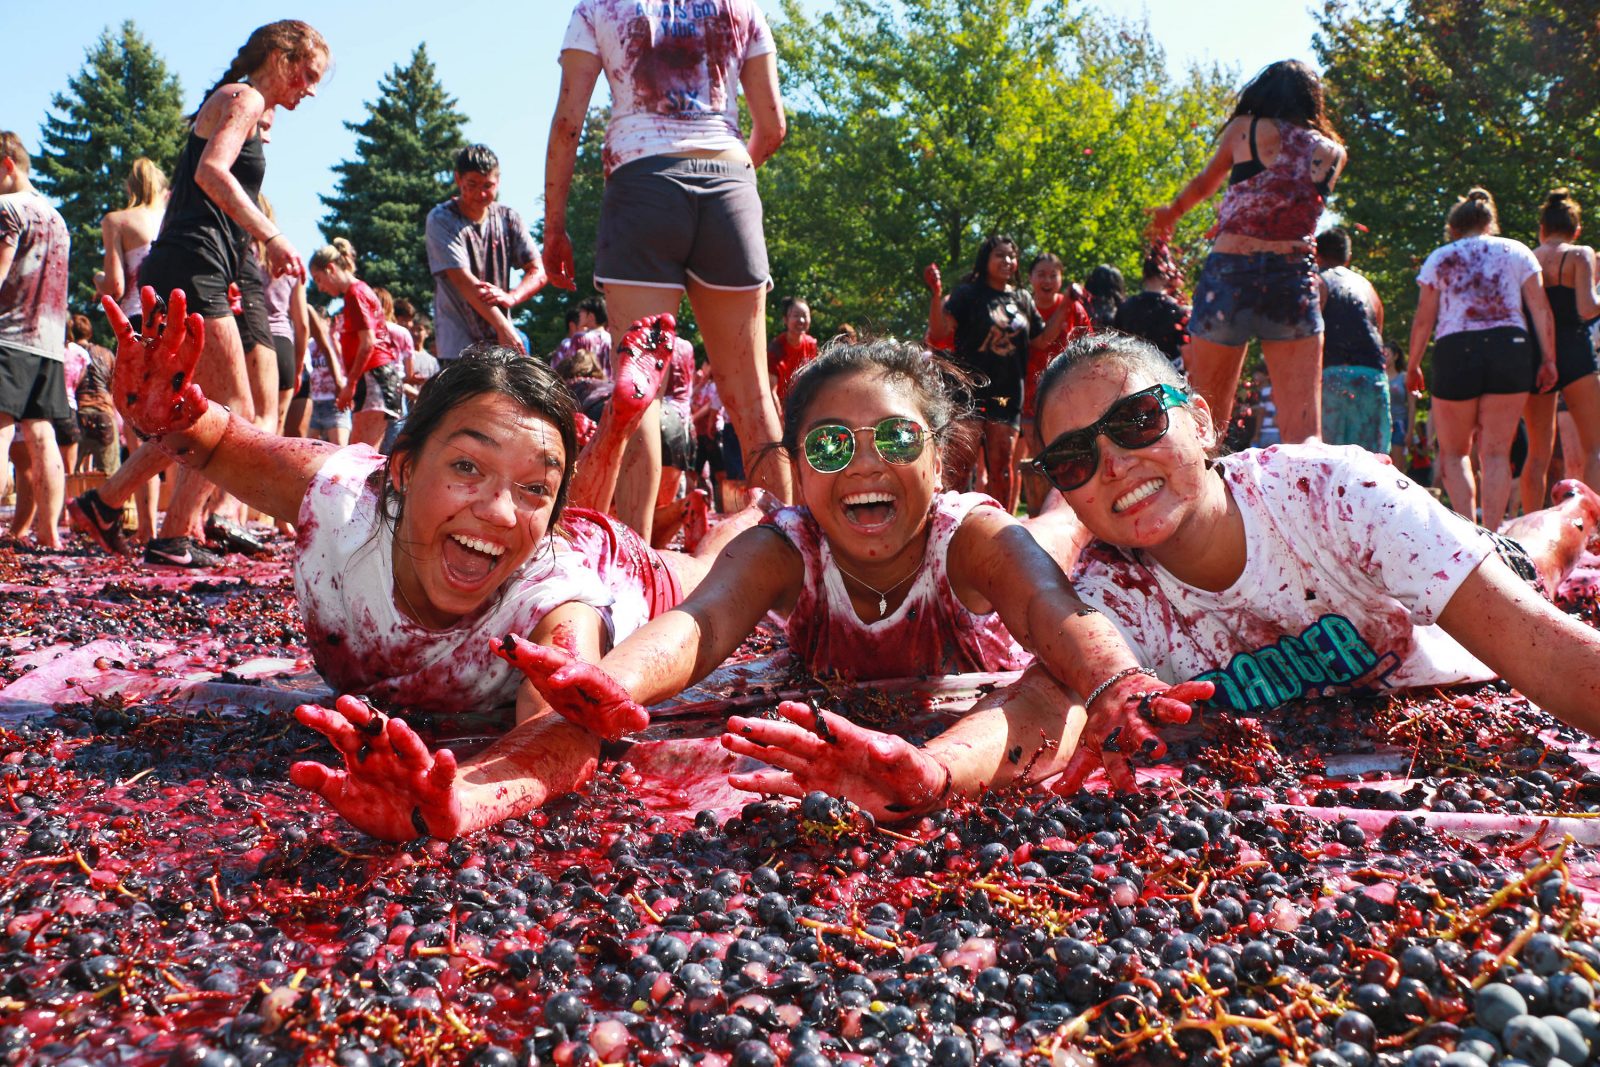 Three laughing women sliding in concord grapes outside 